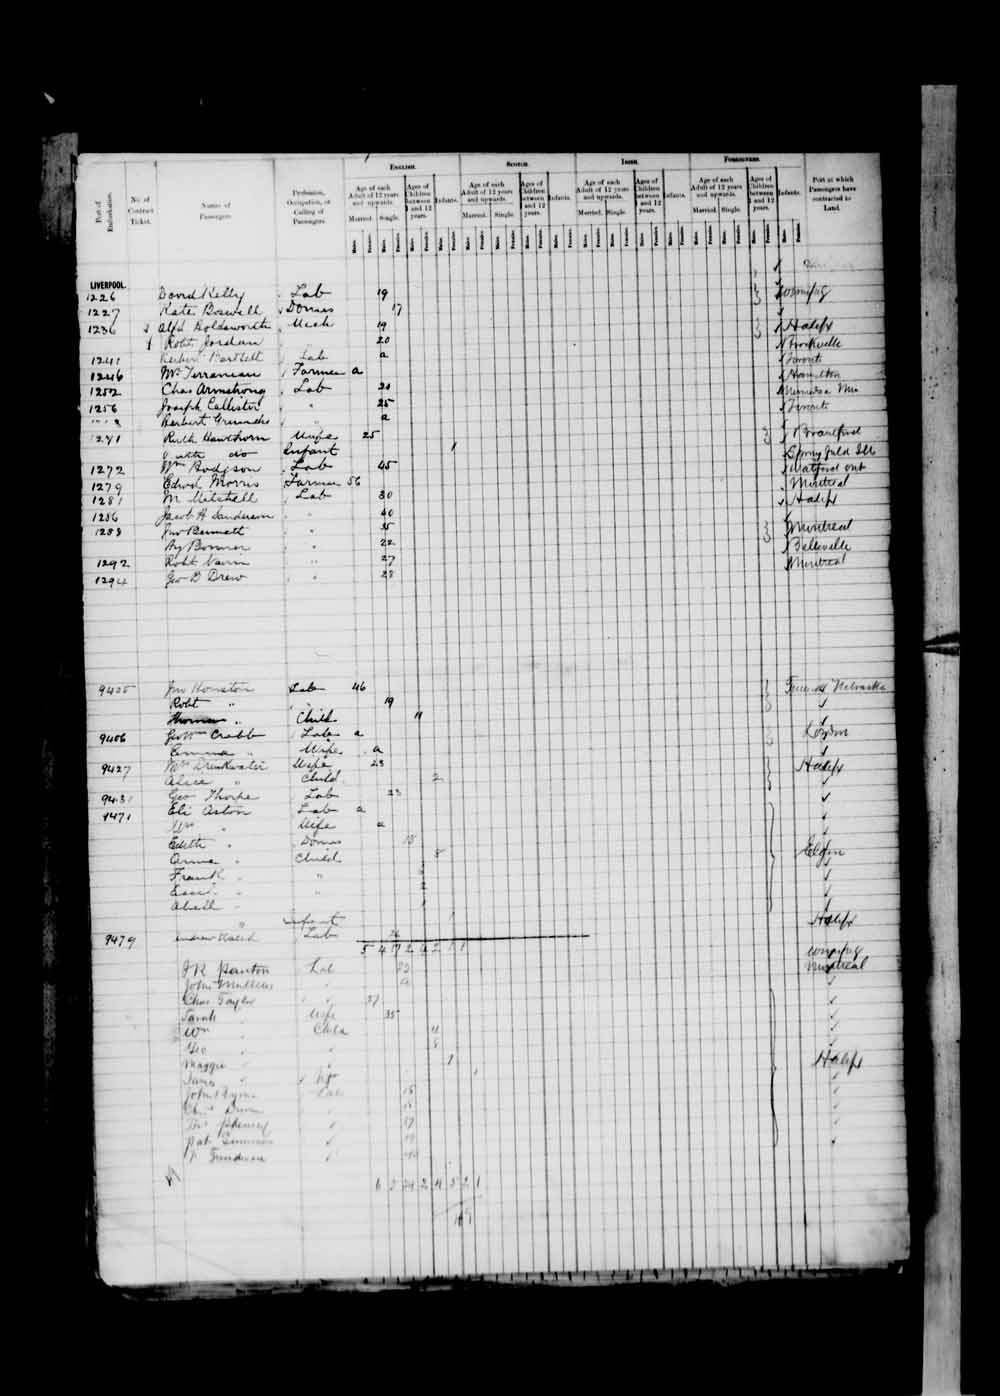 Digitized page of Passenger Lists for Image No.: e003674948